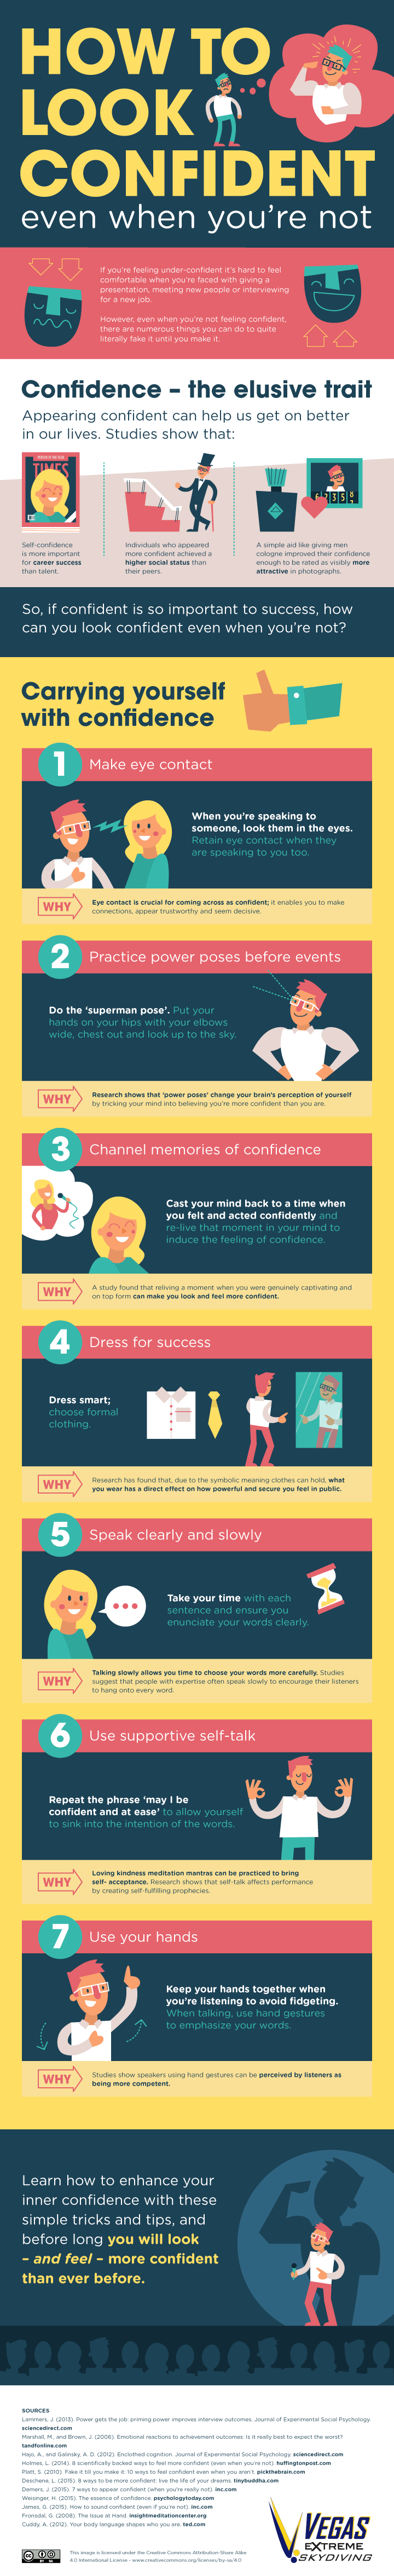 How to Look Confident Even When You Are Not Infographic